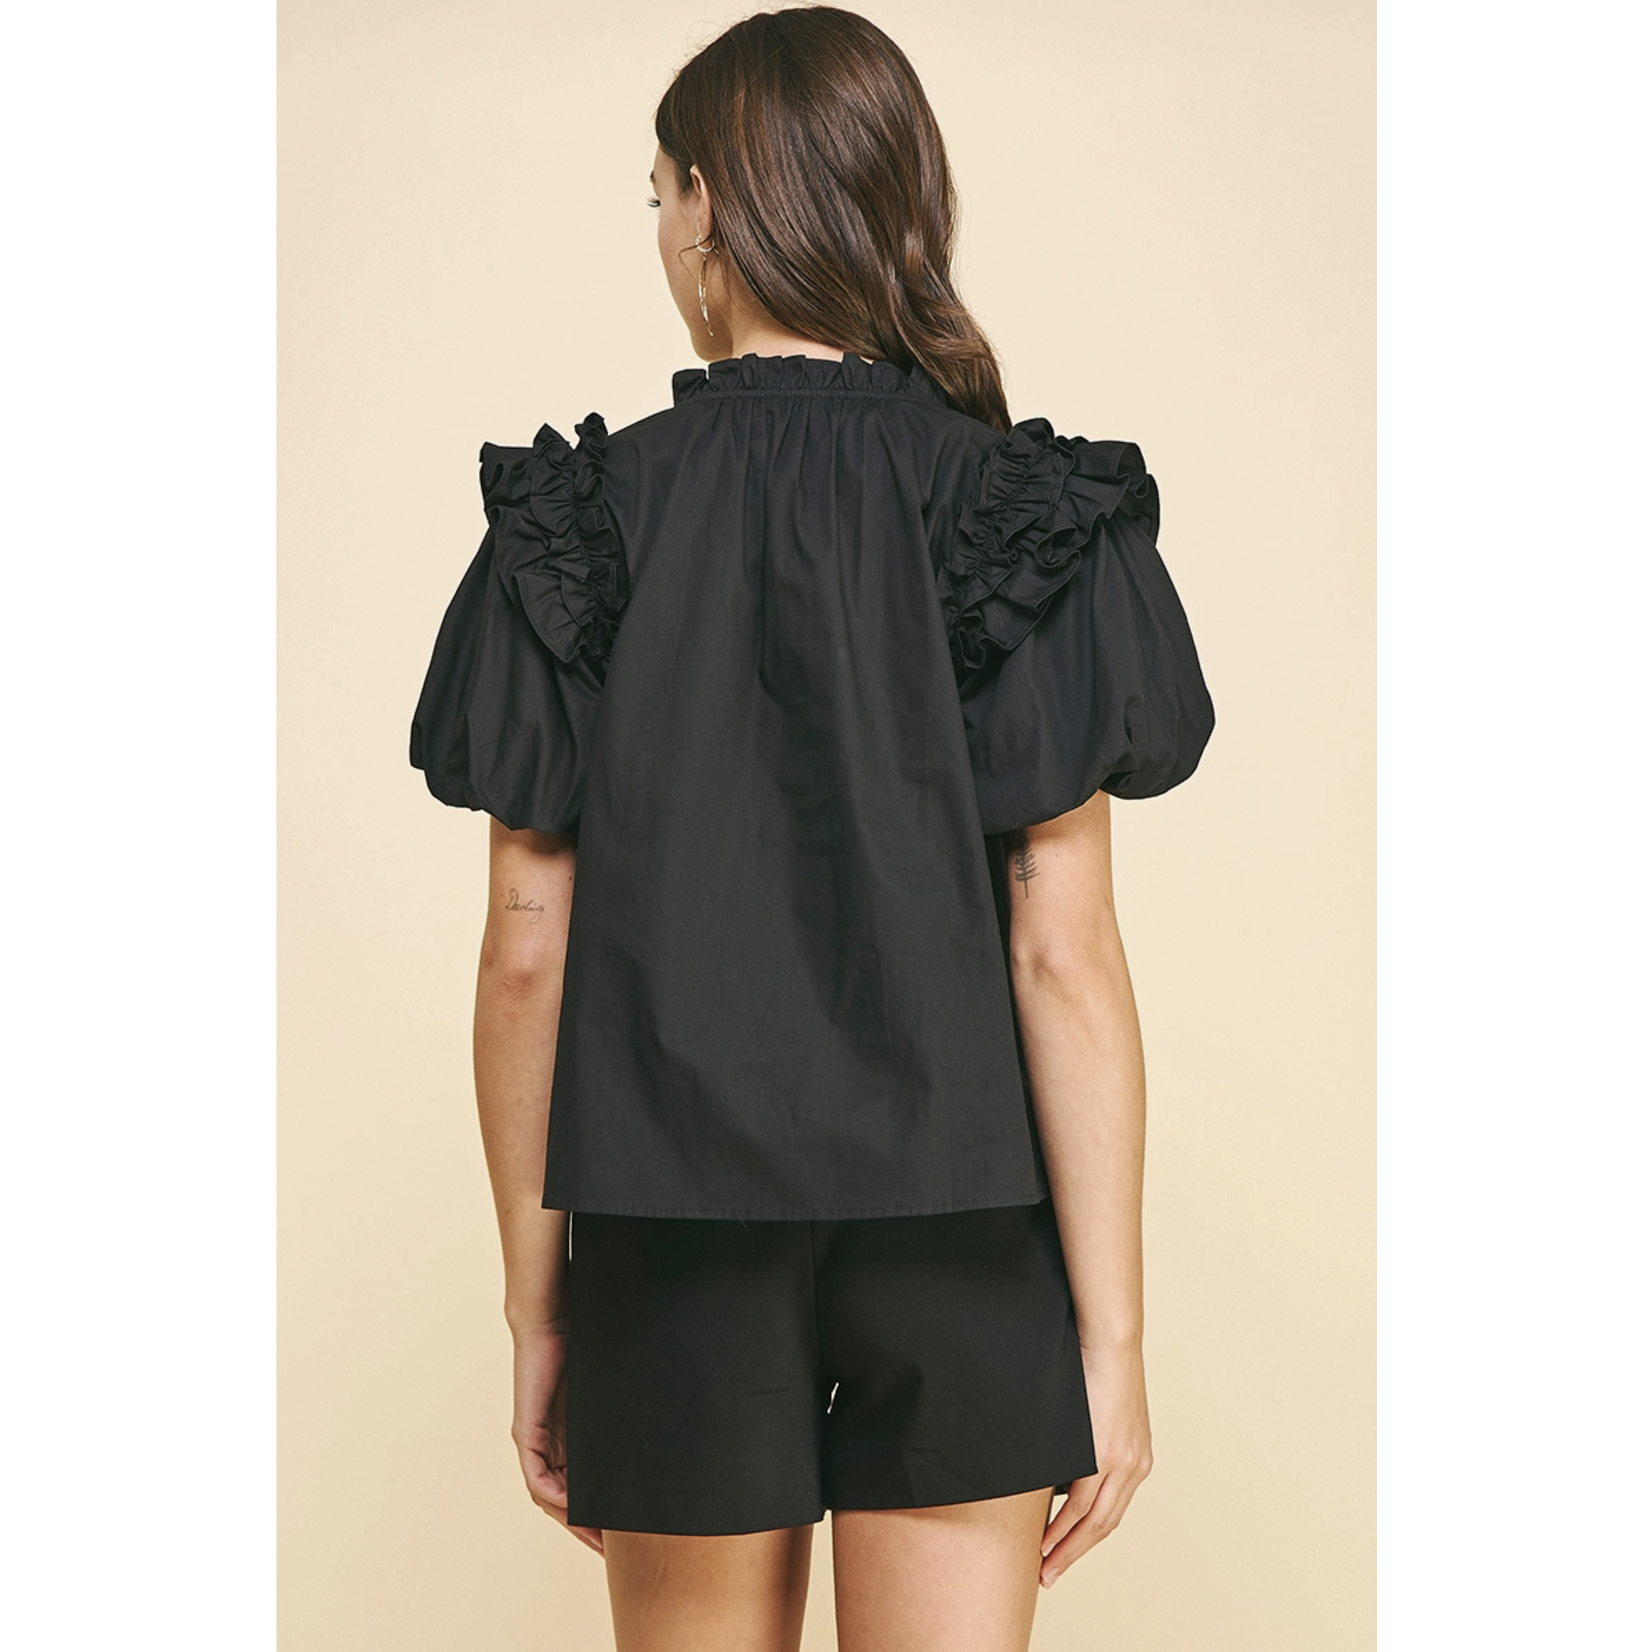 Bubble sleeve with ruffle top